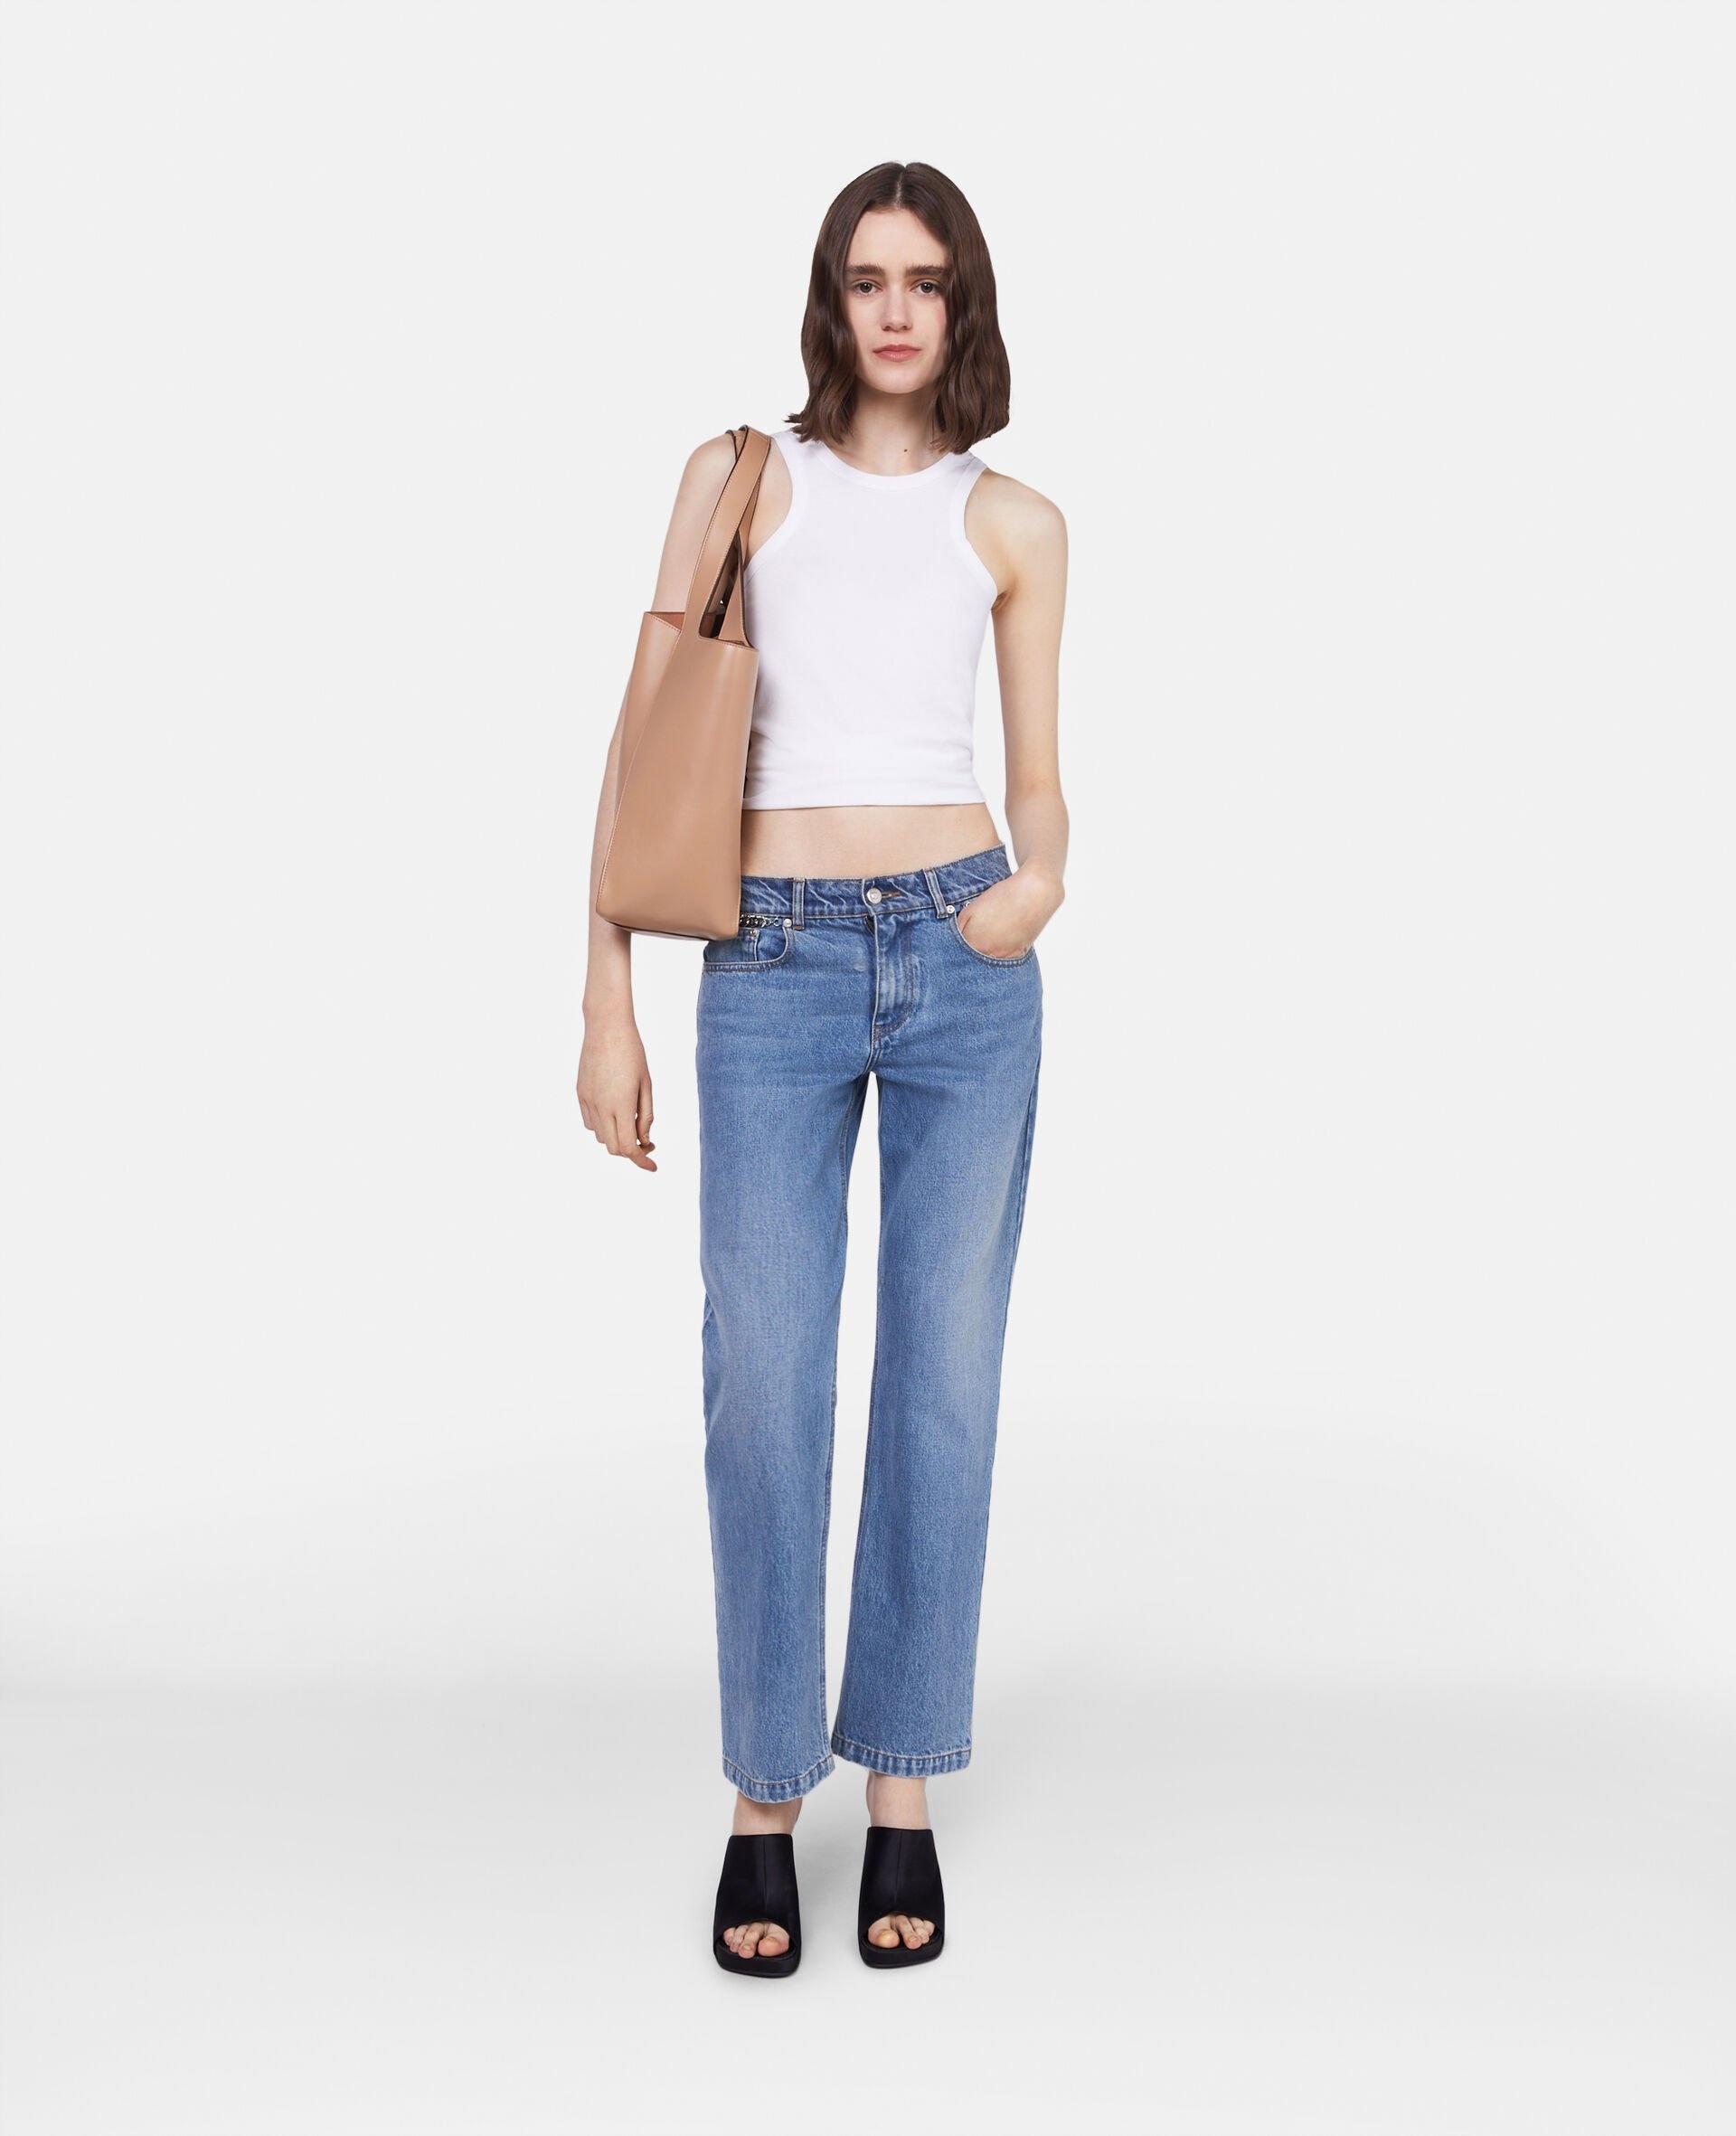 Falabella Chain Light Wash Cropped Jeans - 2